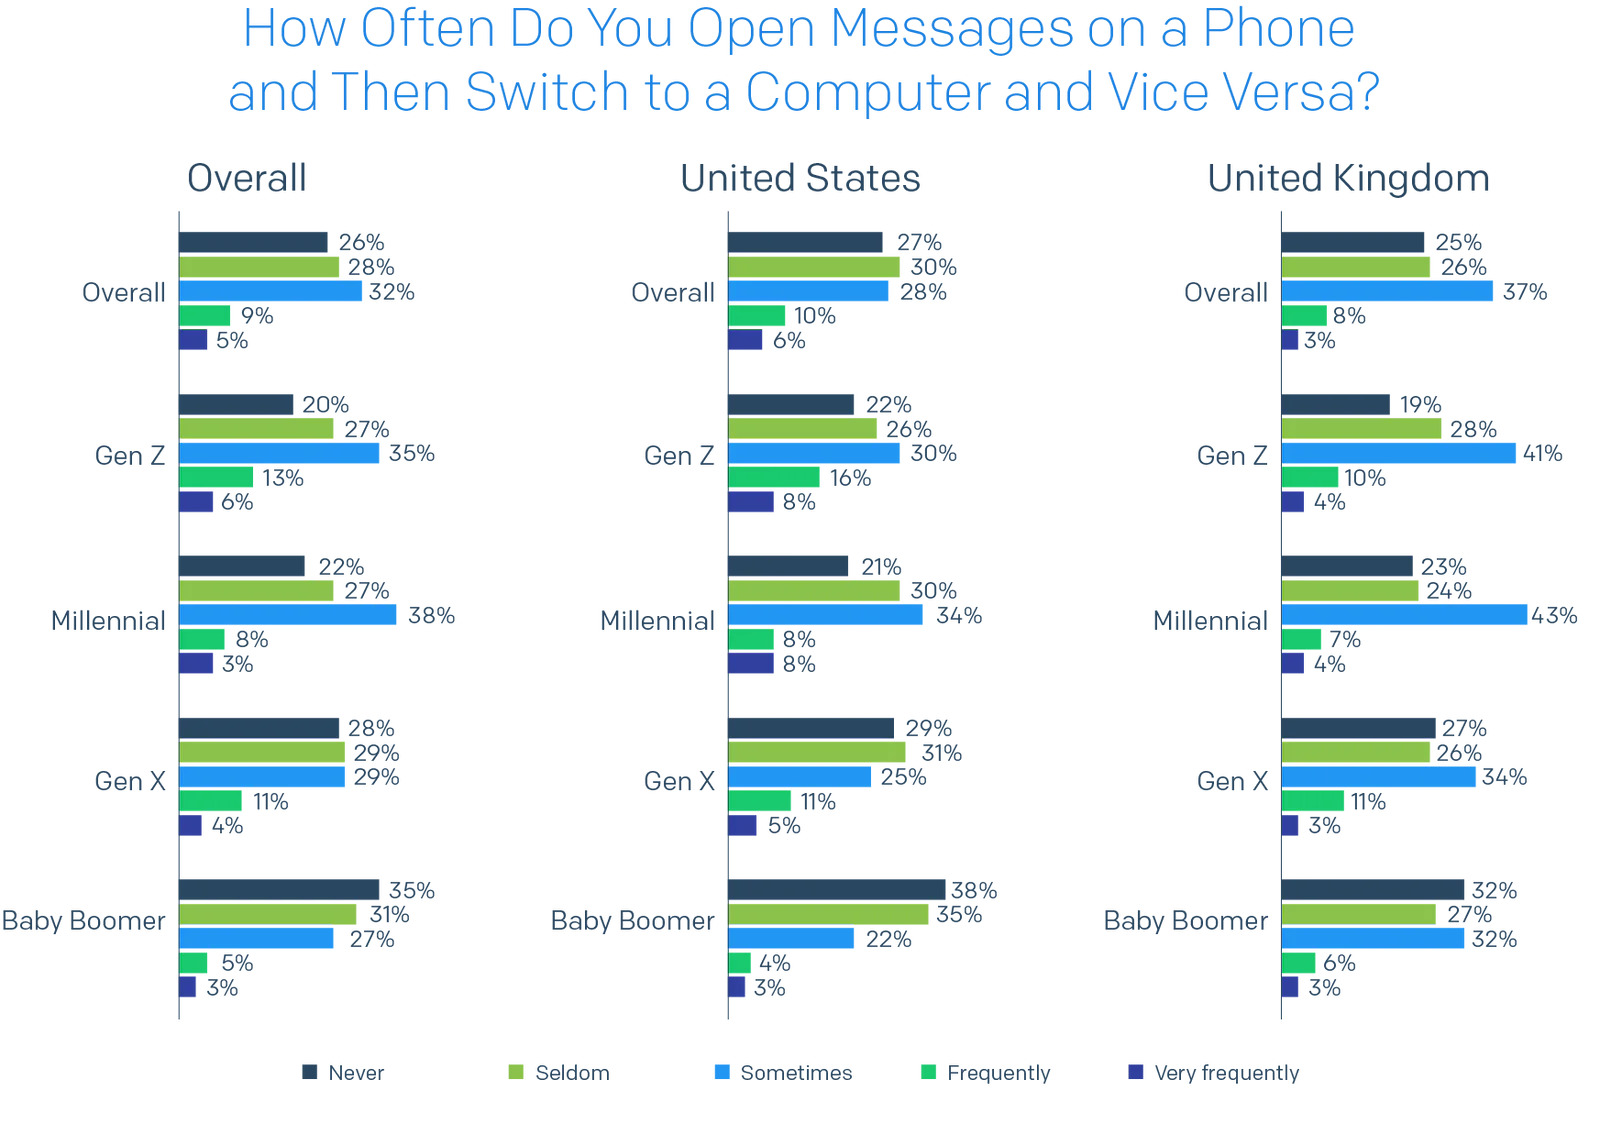 Country breakdown of How Often Do You Open Messages on a Phone and Then Switch to a Computer and Vice Versa?